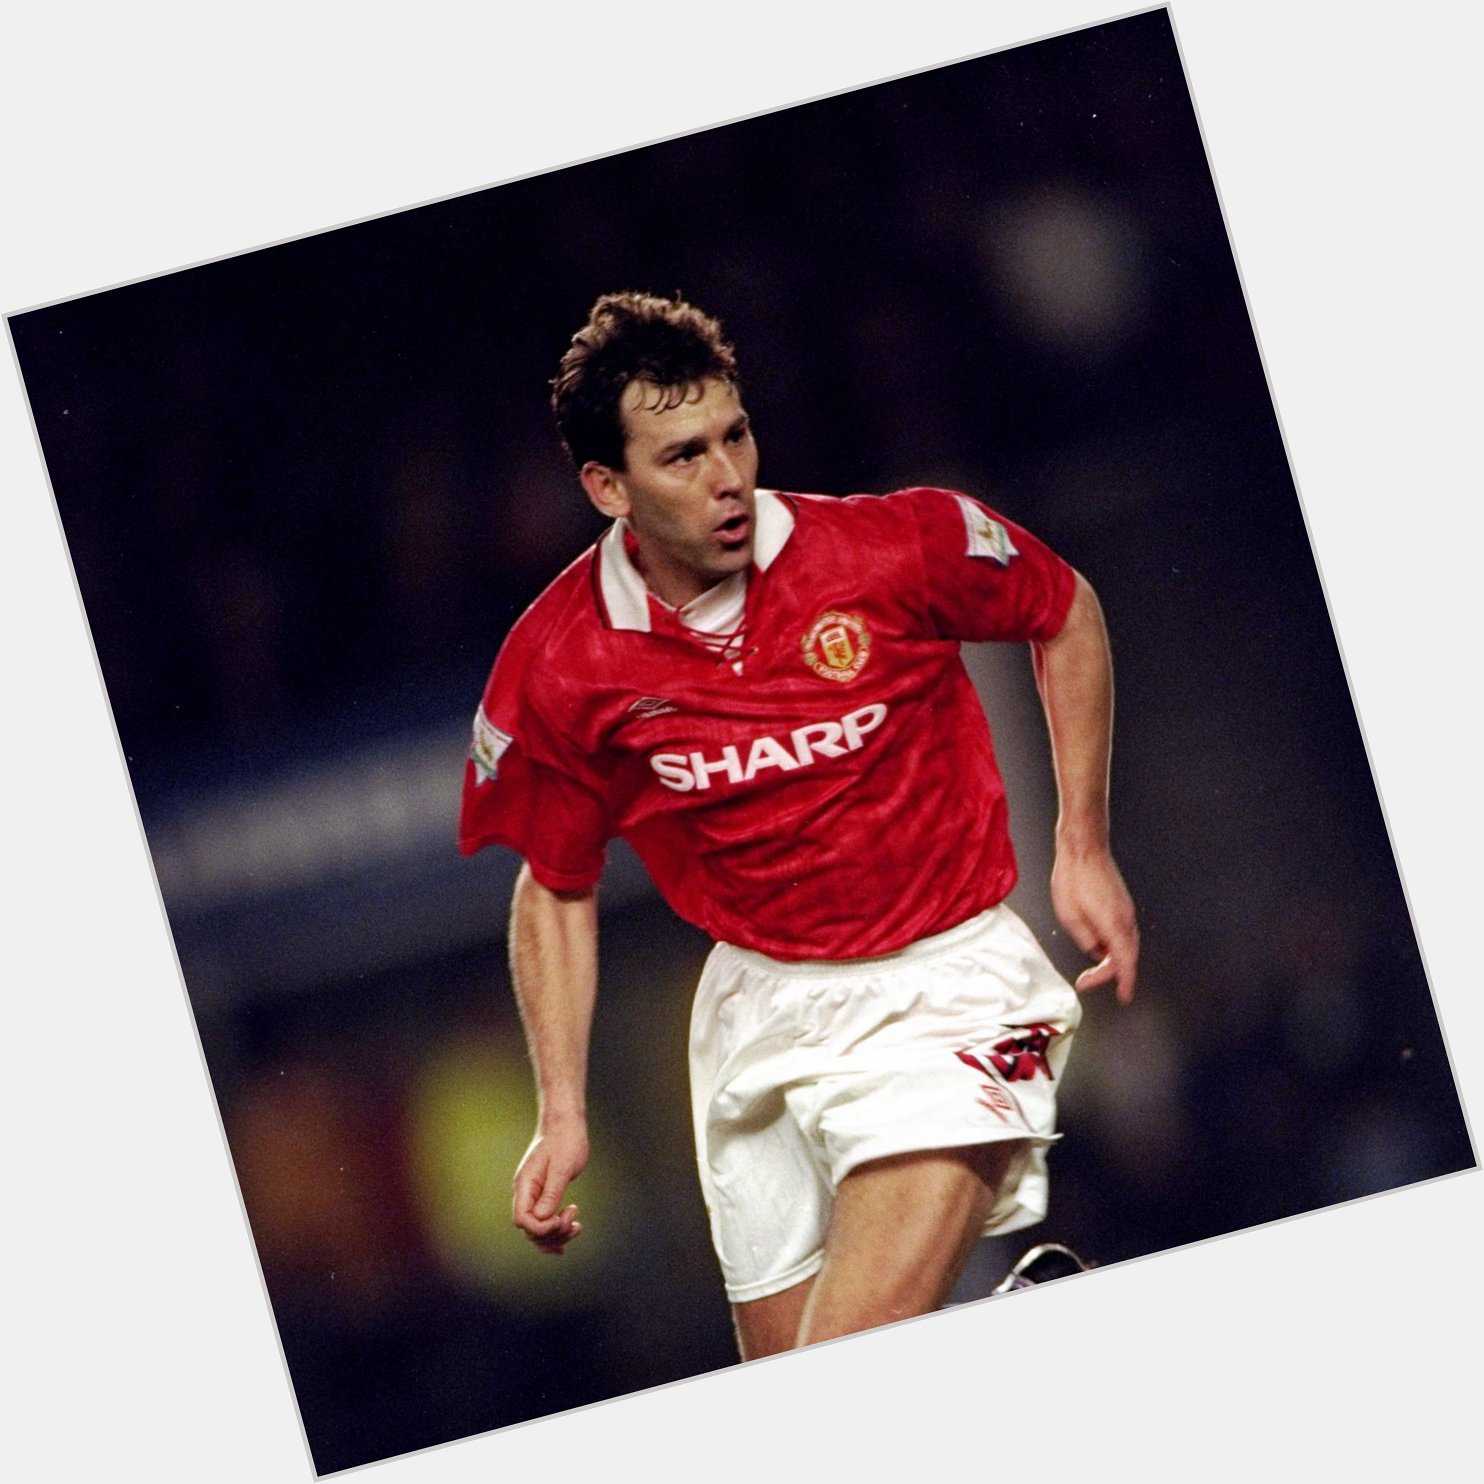                  Happy Birthday to 3  x FA Cup winner and       , Bryan Robson 